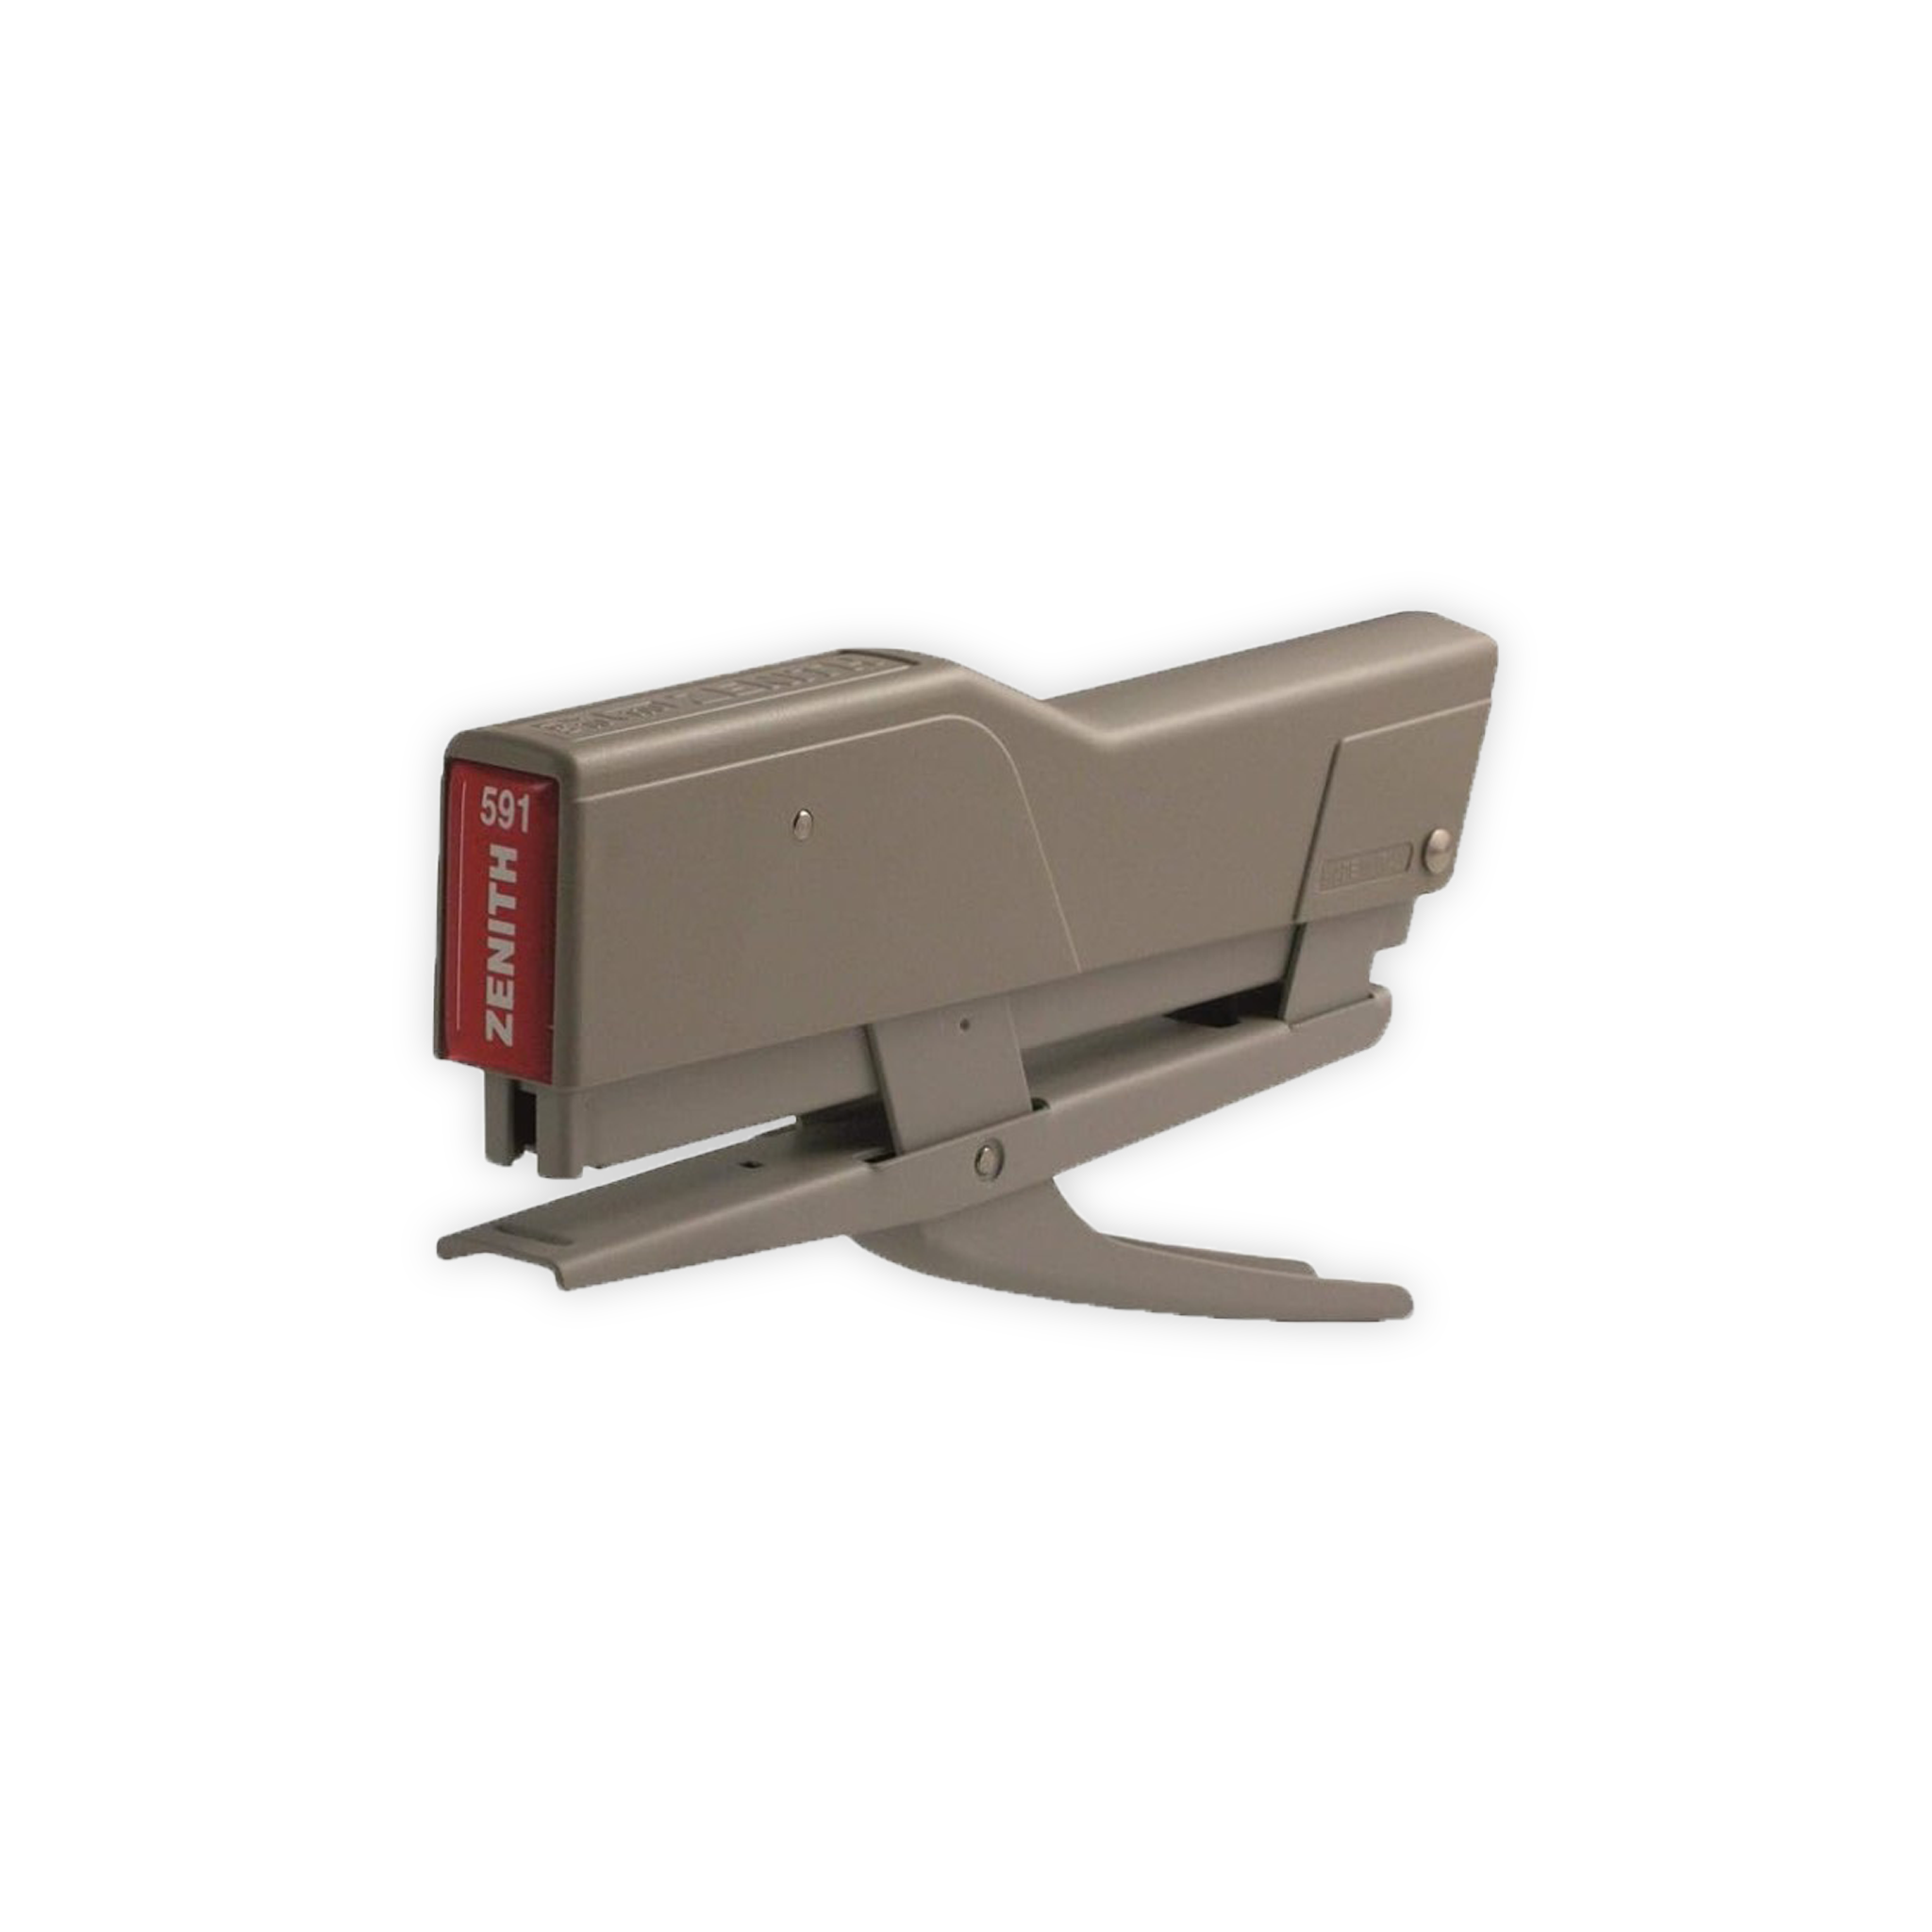 A mechanical stapler with ZENITH embedded on the front end. This model has a beige finish.